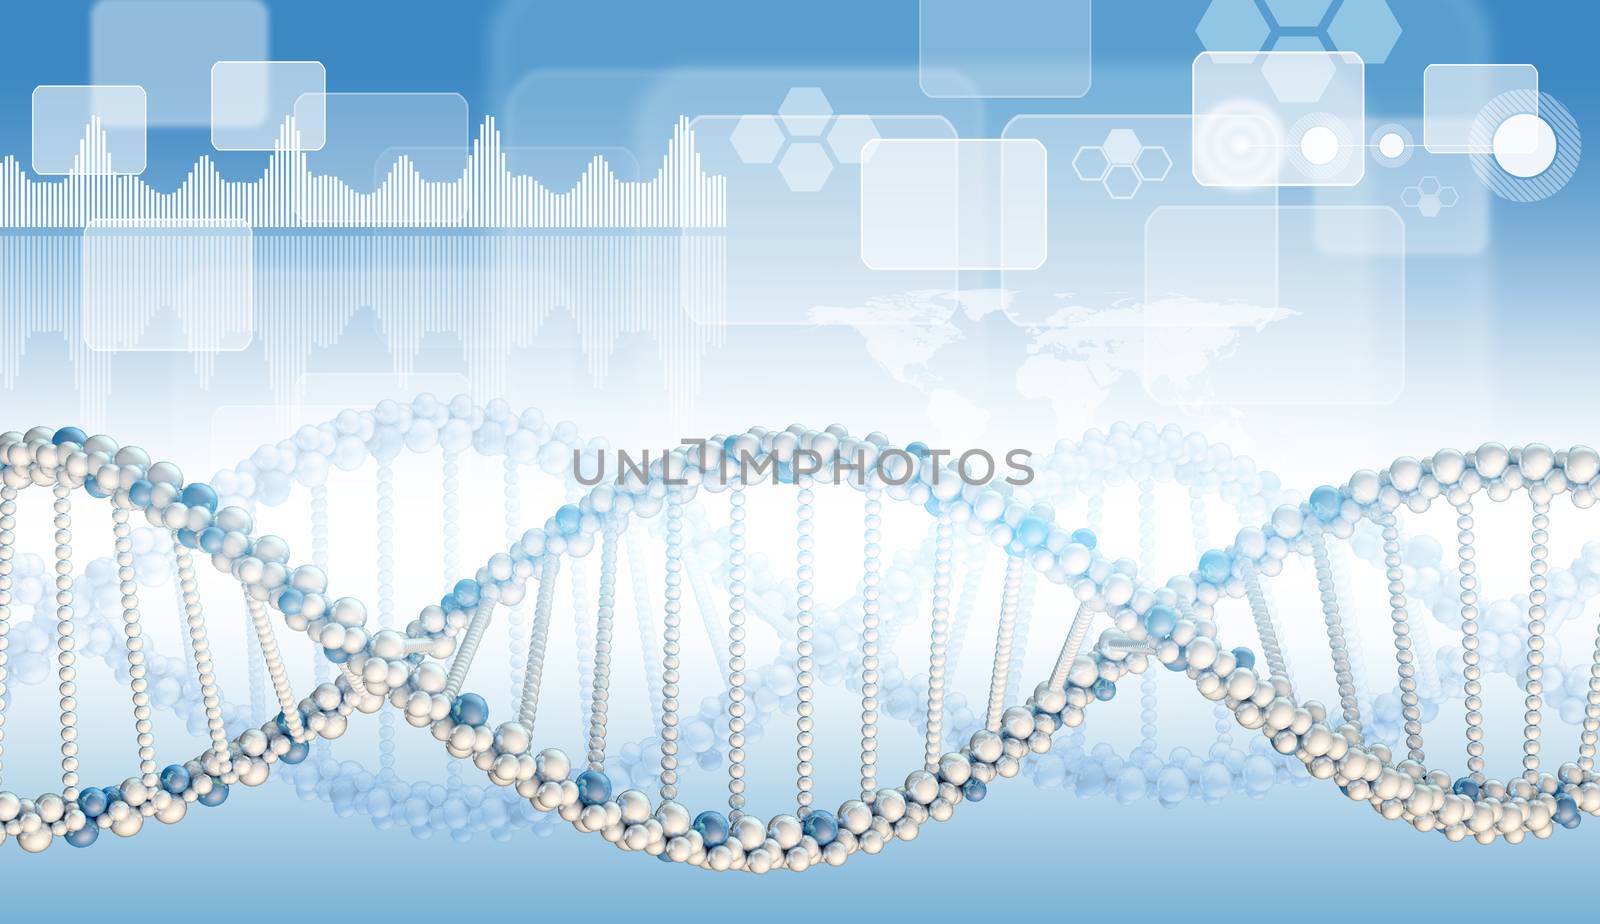 DNA model with graphs, rectangles and hexagons. Blue gradient background